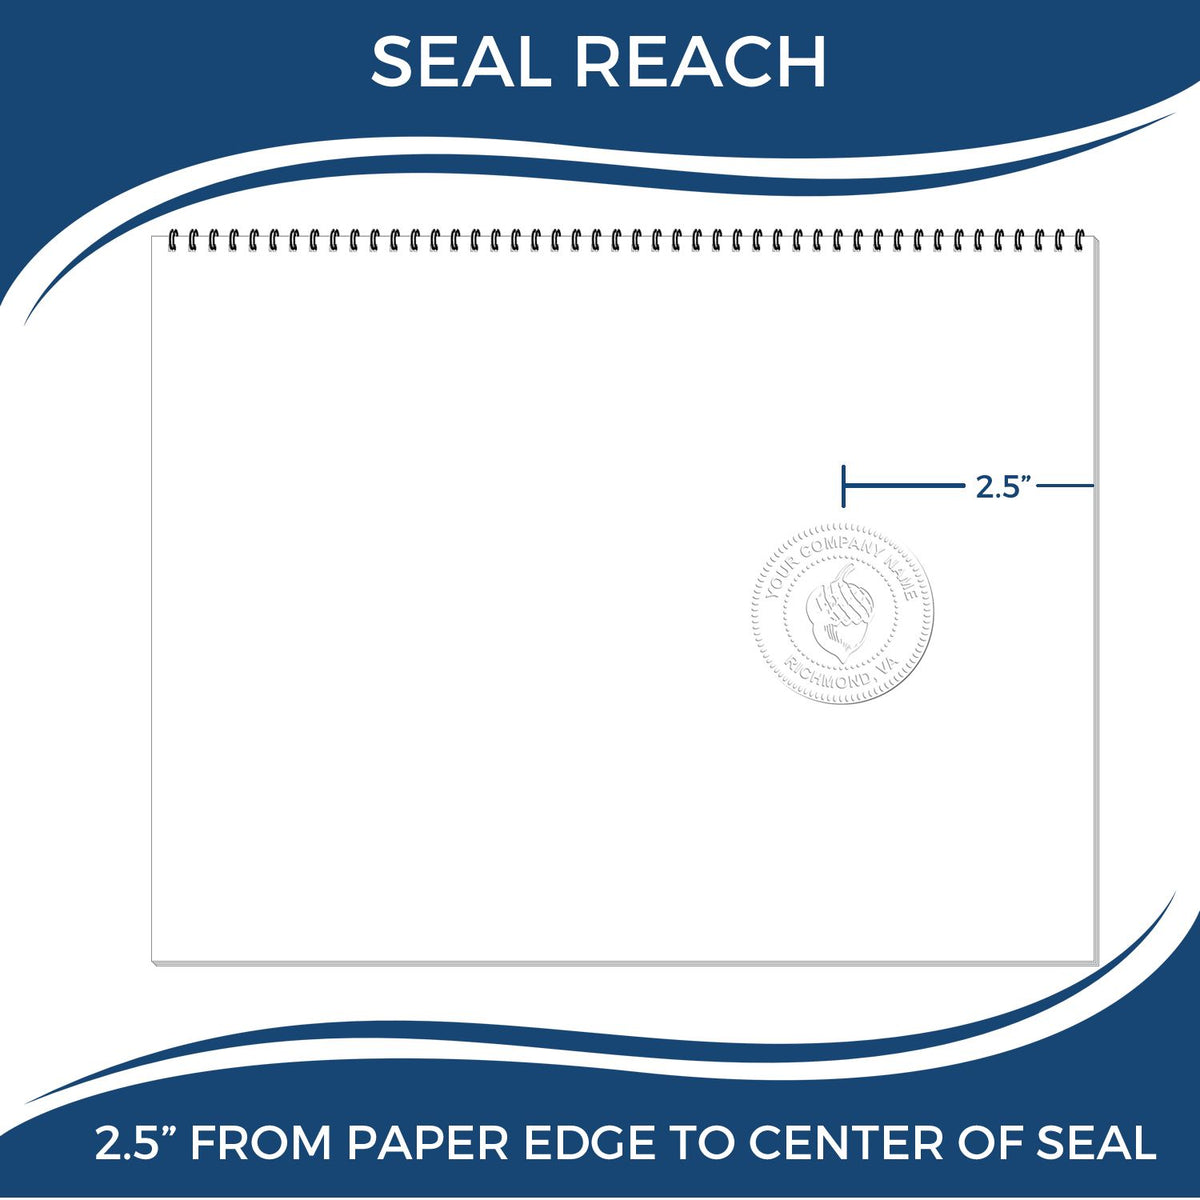 An infographic showing the seal reach which is represented by a ruler and a miniature seal image of the Long Reach New Jersey PE Seal